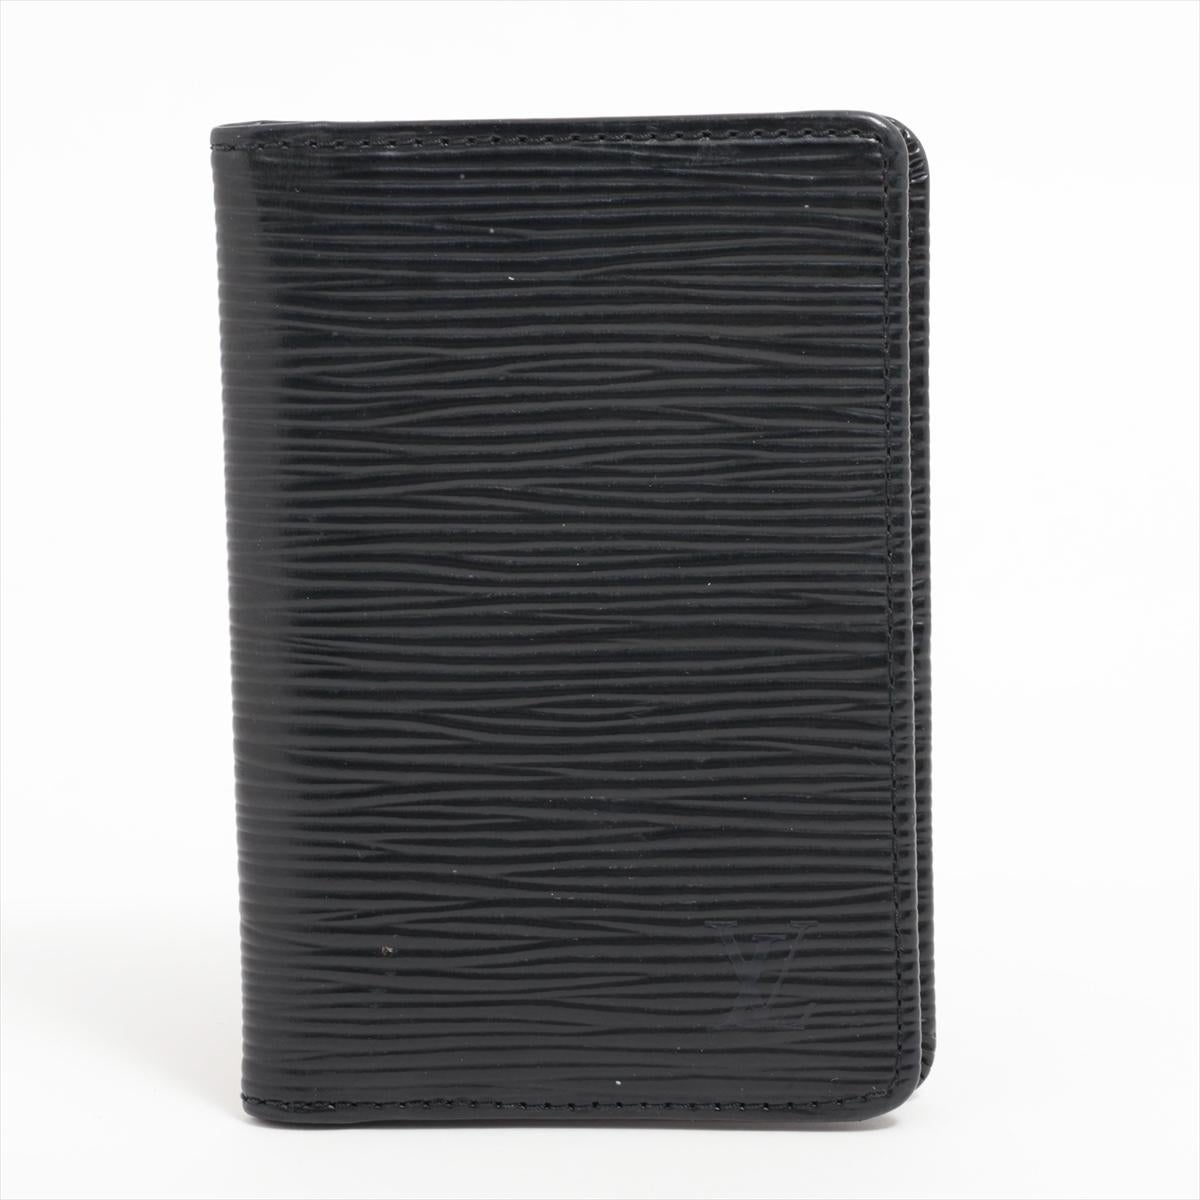 The Louis Vuitton Epi Organizer de Poche Card Case in sleek black a compact and sophisticated accessory that combines functionality with timeless elegance. Crafted from the iconic Epi leather, the card case is a testament to Louis Vuitton's